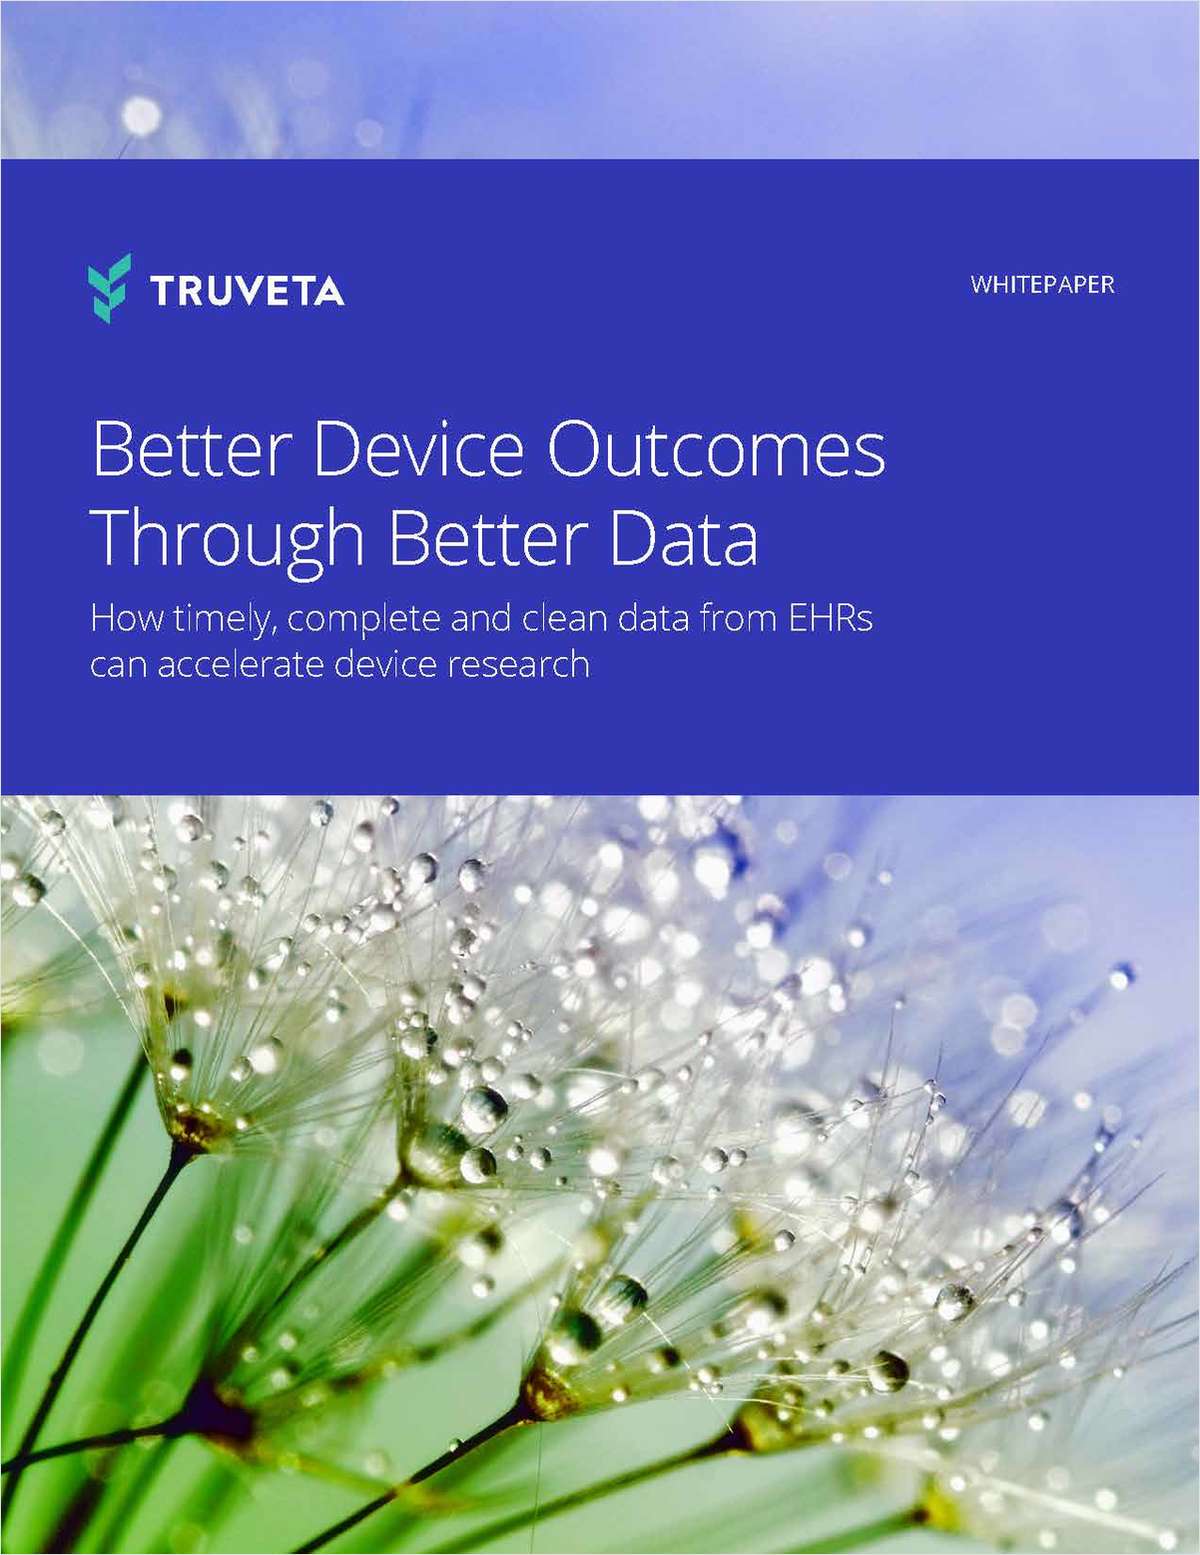 Better Device Outcomes Through Better Data